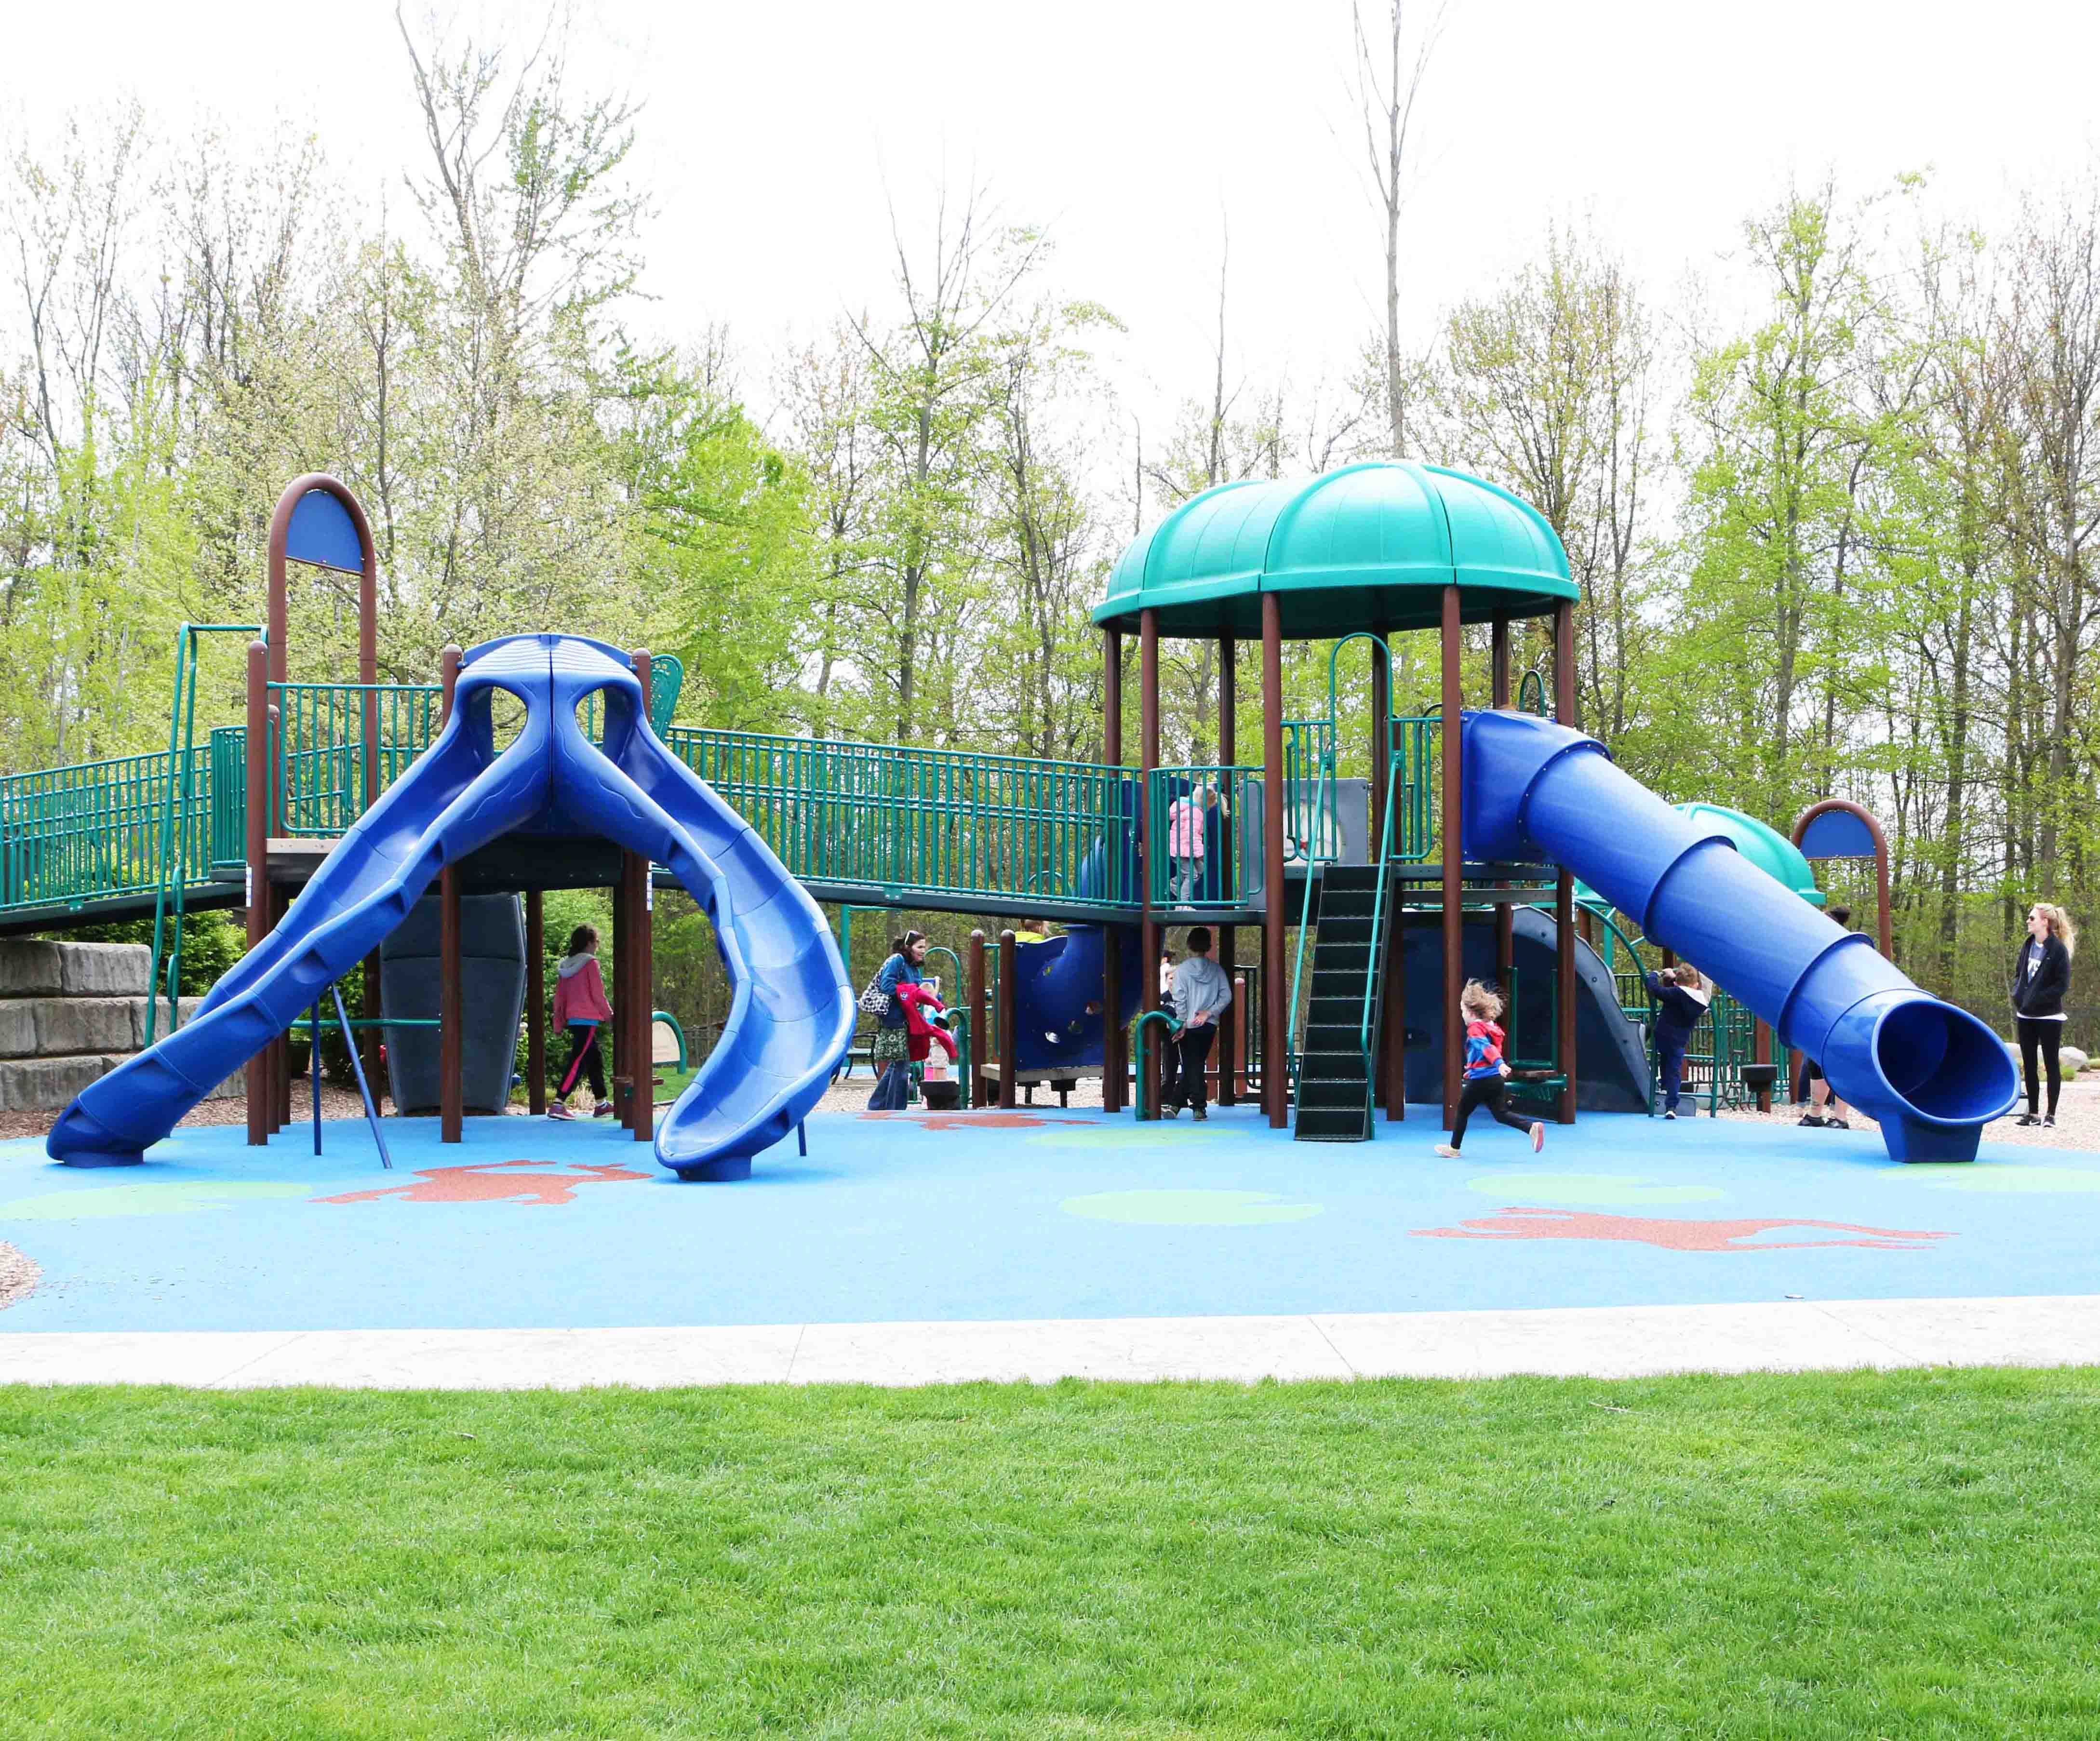 Frog Hollow Playground wide